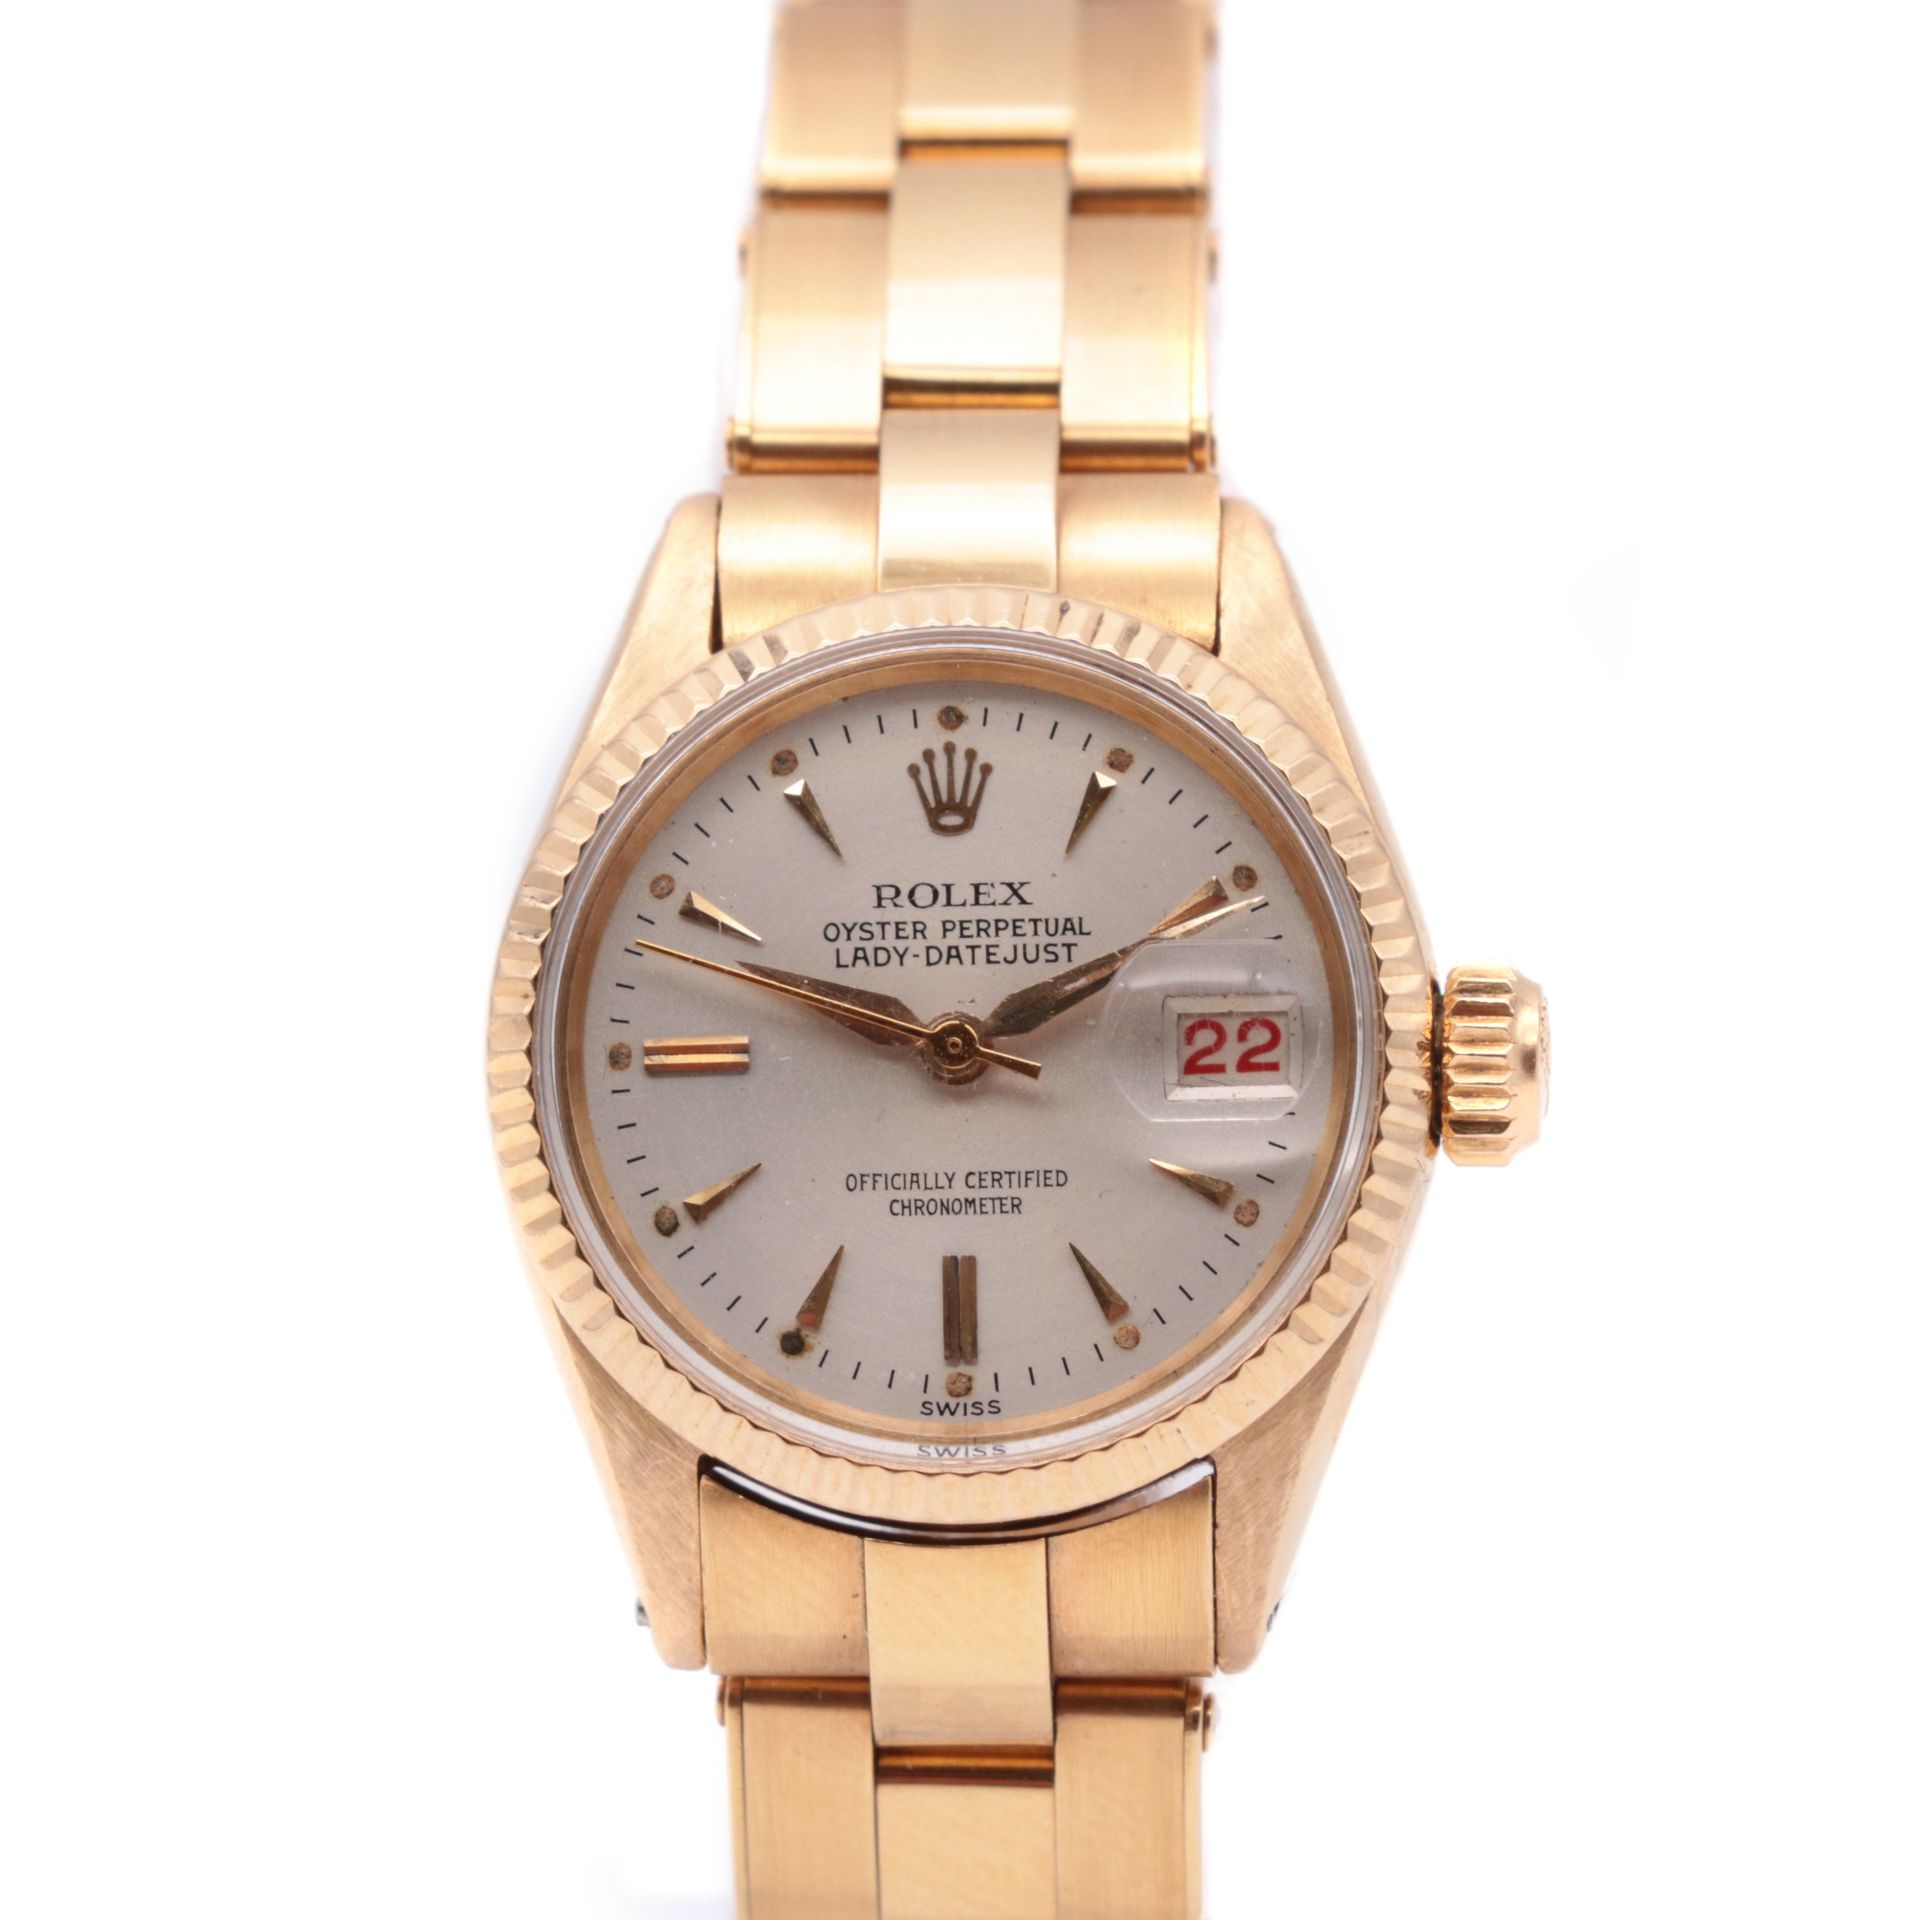 Montre Rolex, Oyster Perpetual Datejust The case in 18 ct yellow gold

The circu&hellip;